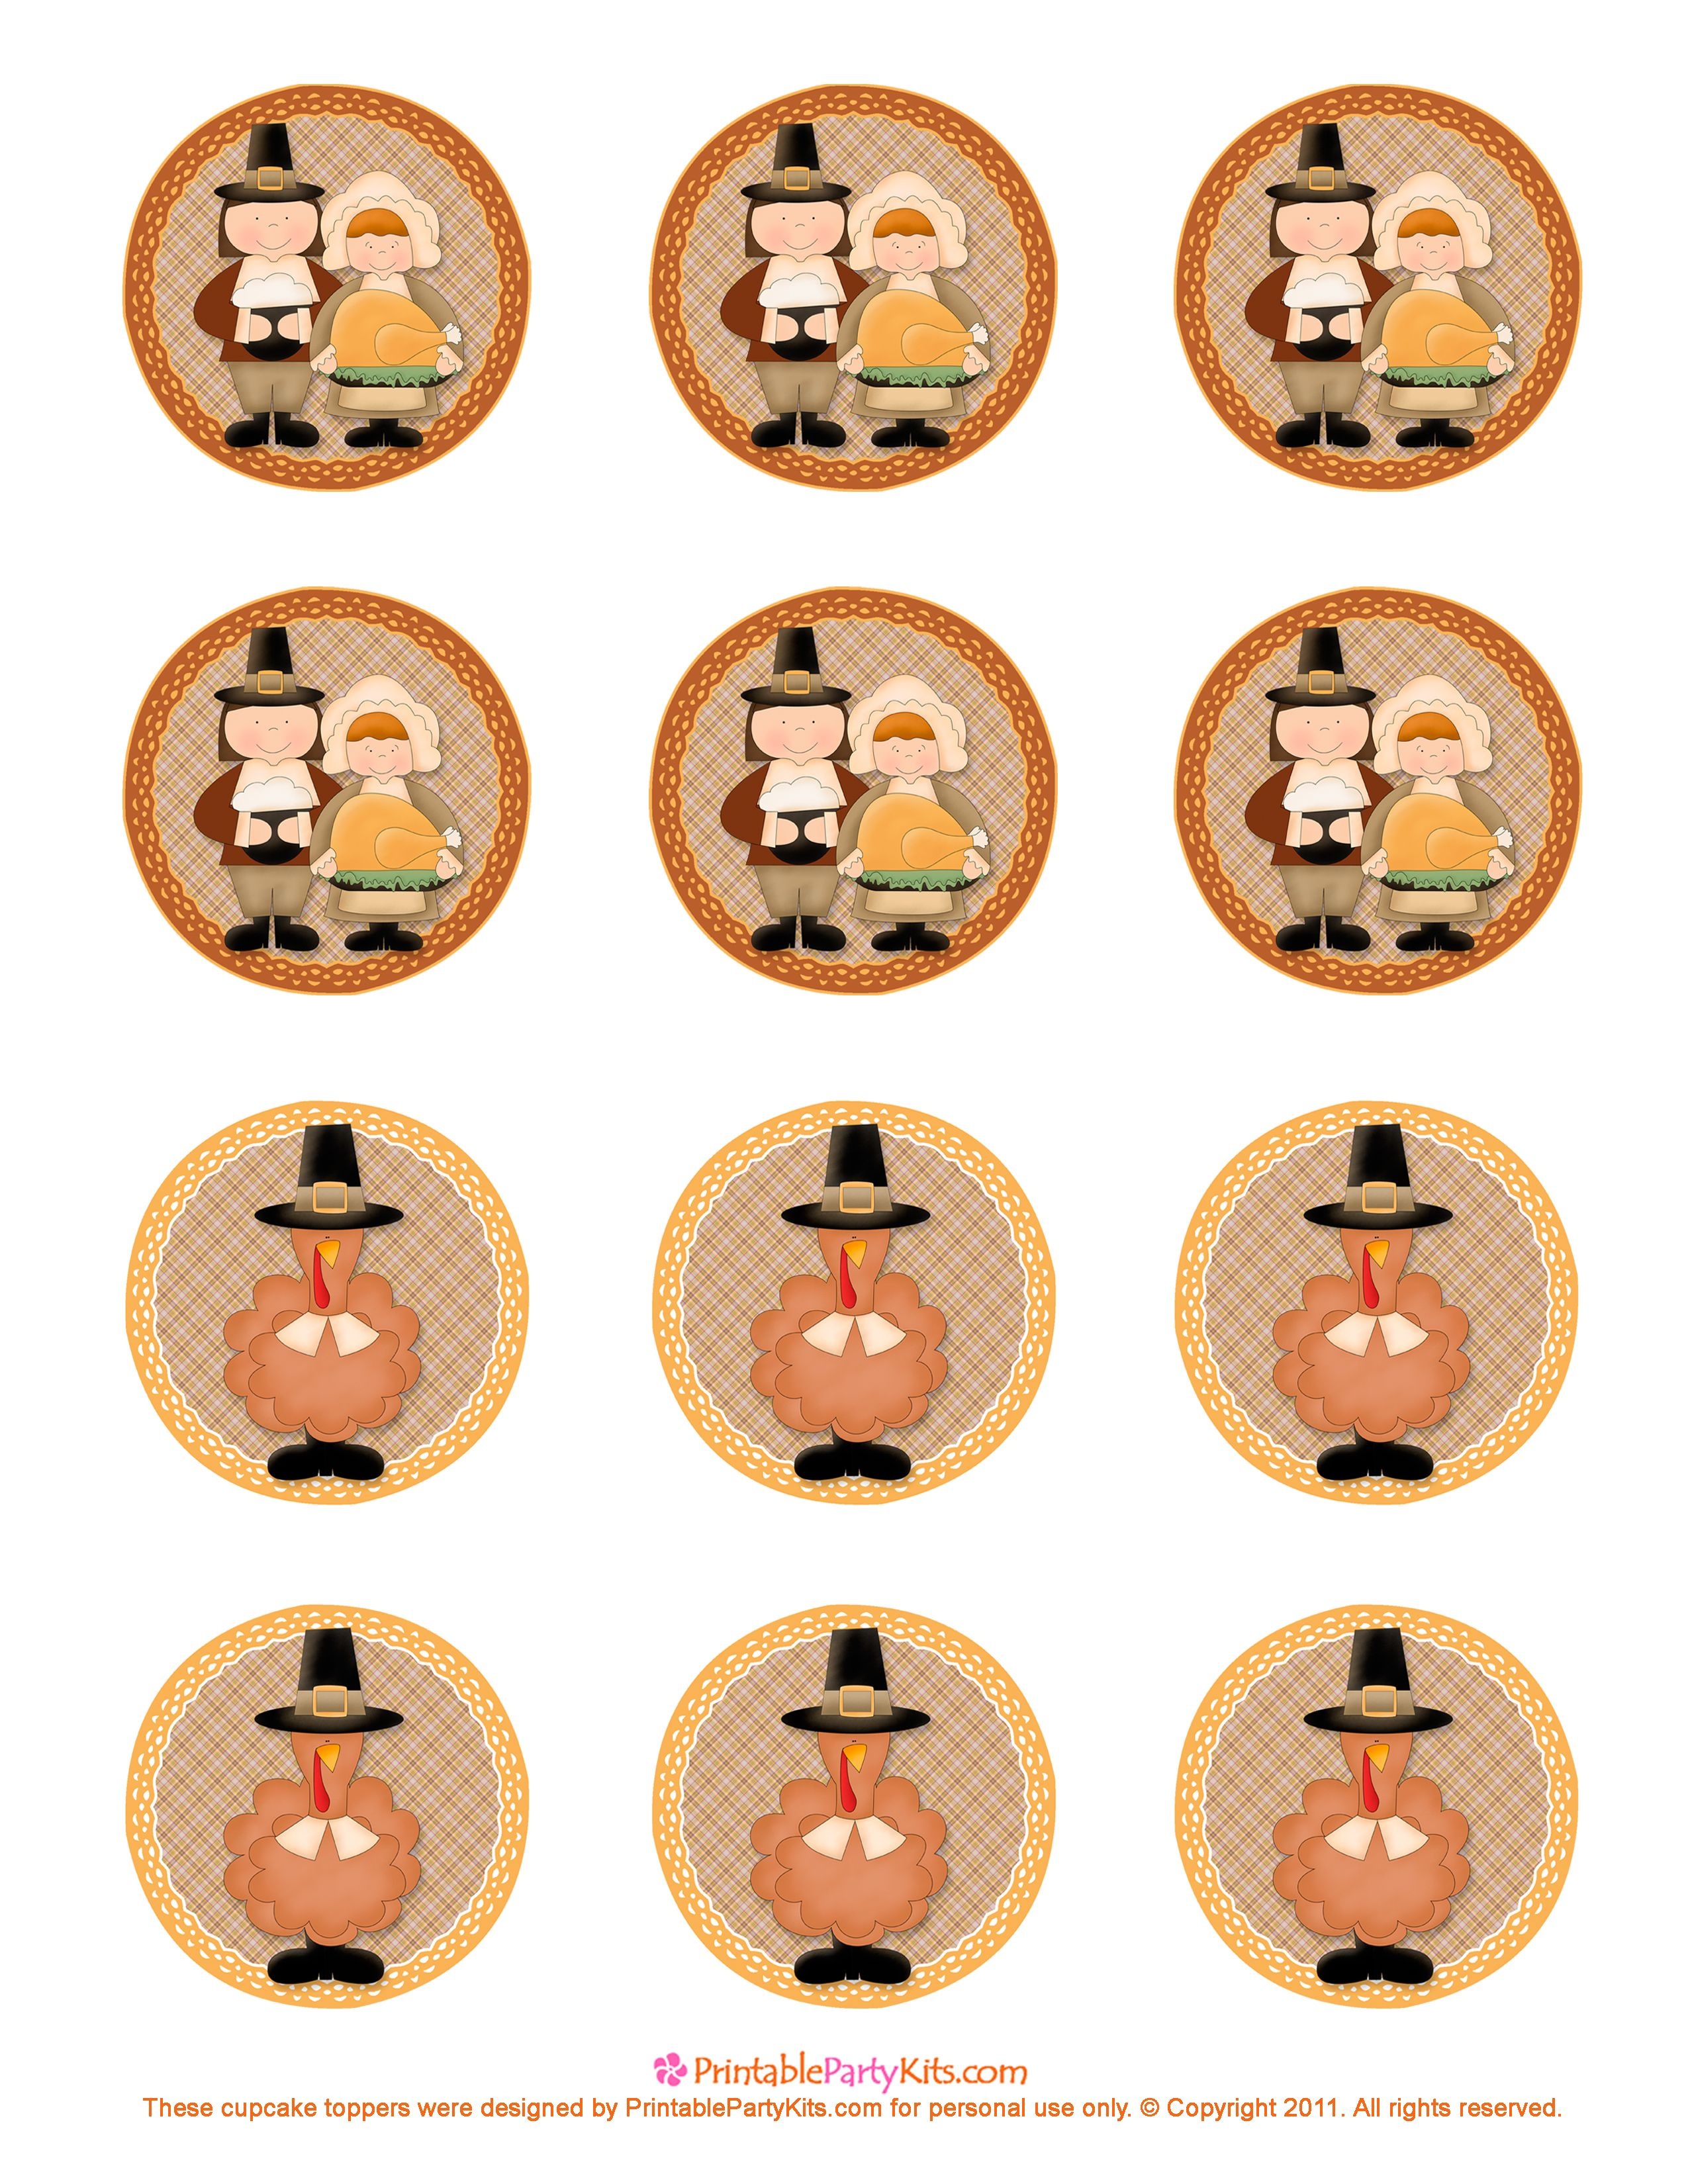 Pinshirley Buttram On Fall | Thanksgiving Cupcakes, Christmas - Thanksgiving Cupcake Toppers Printable Free